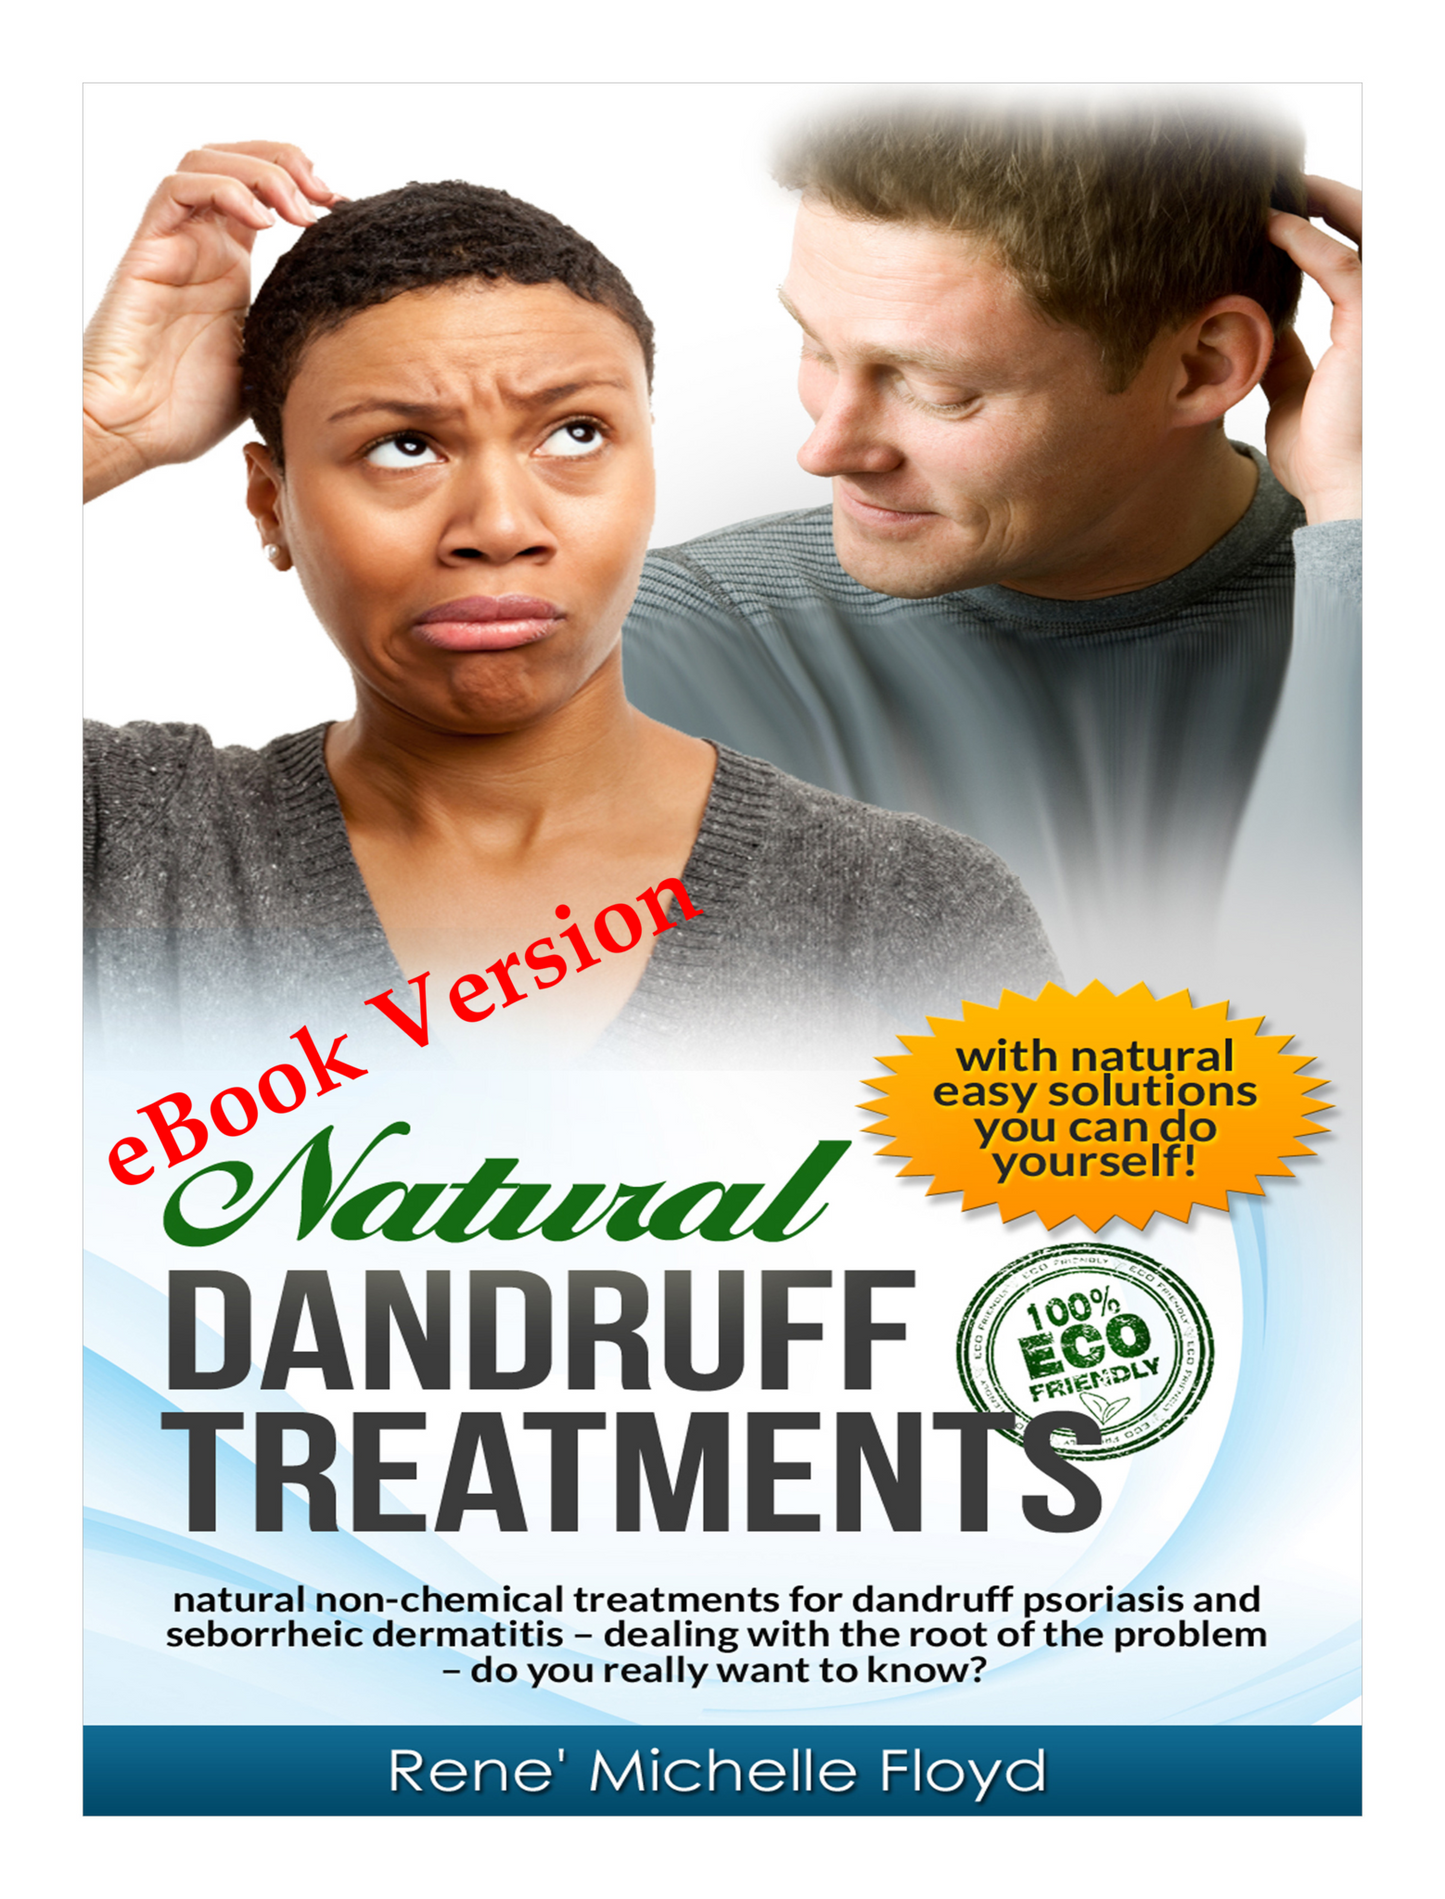 Natural Dandruff Treatments--natural non-chemical treatments for dandruff psoriasis seborrheic dermatitis- dealing with the root of the problem- do you really want to know?  (eBook)